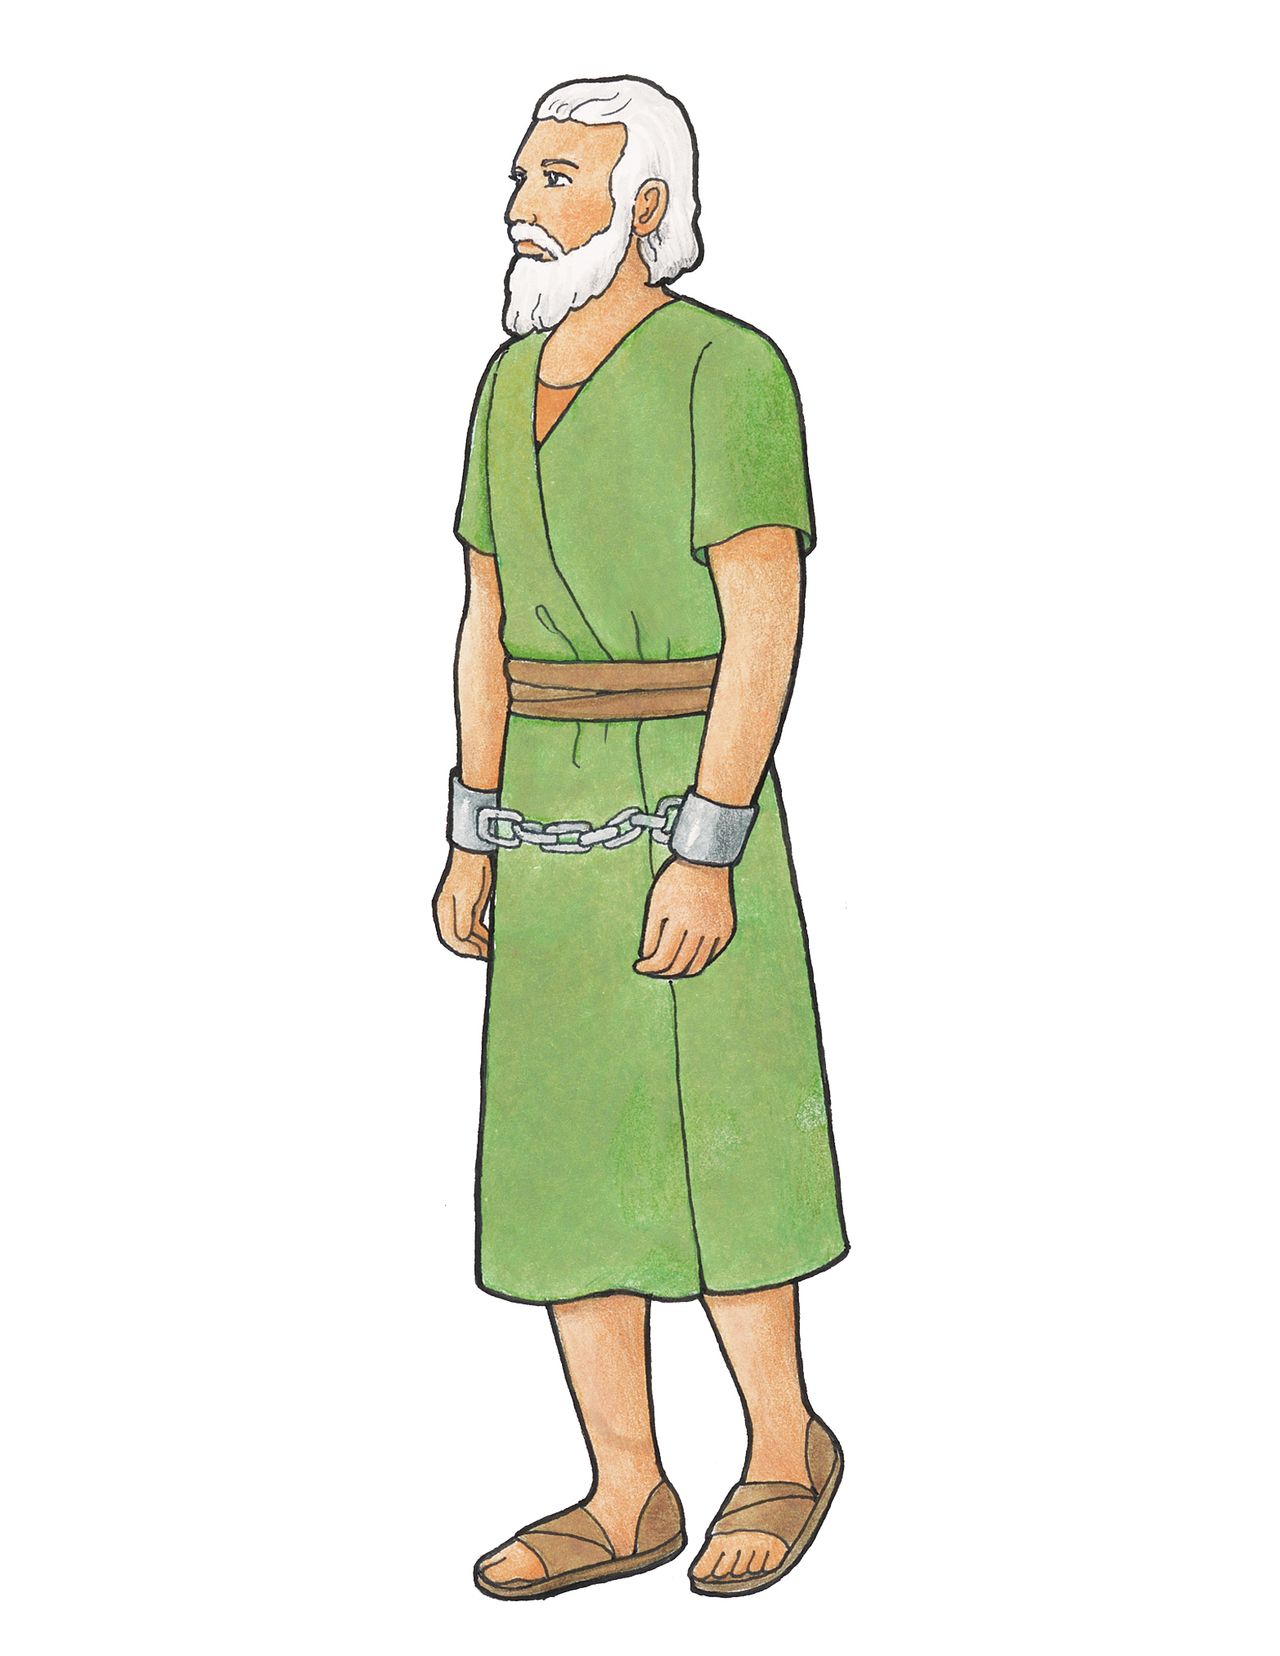 Abinadi, a character from the Book of Mormon, dressed in traditional clothing.